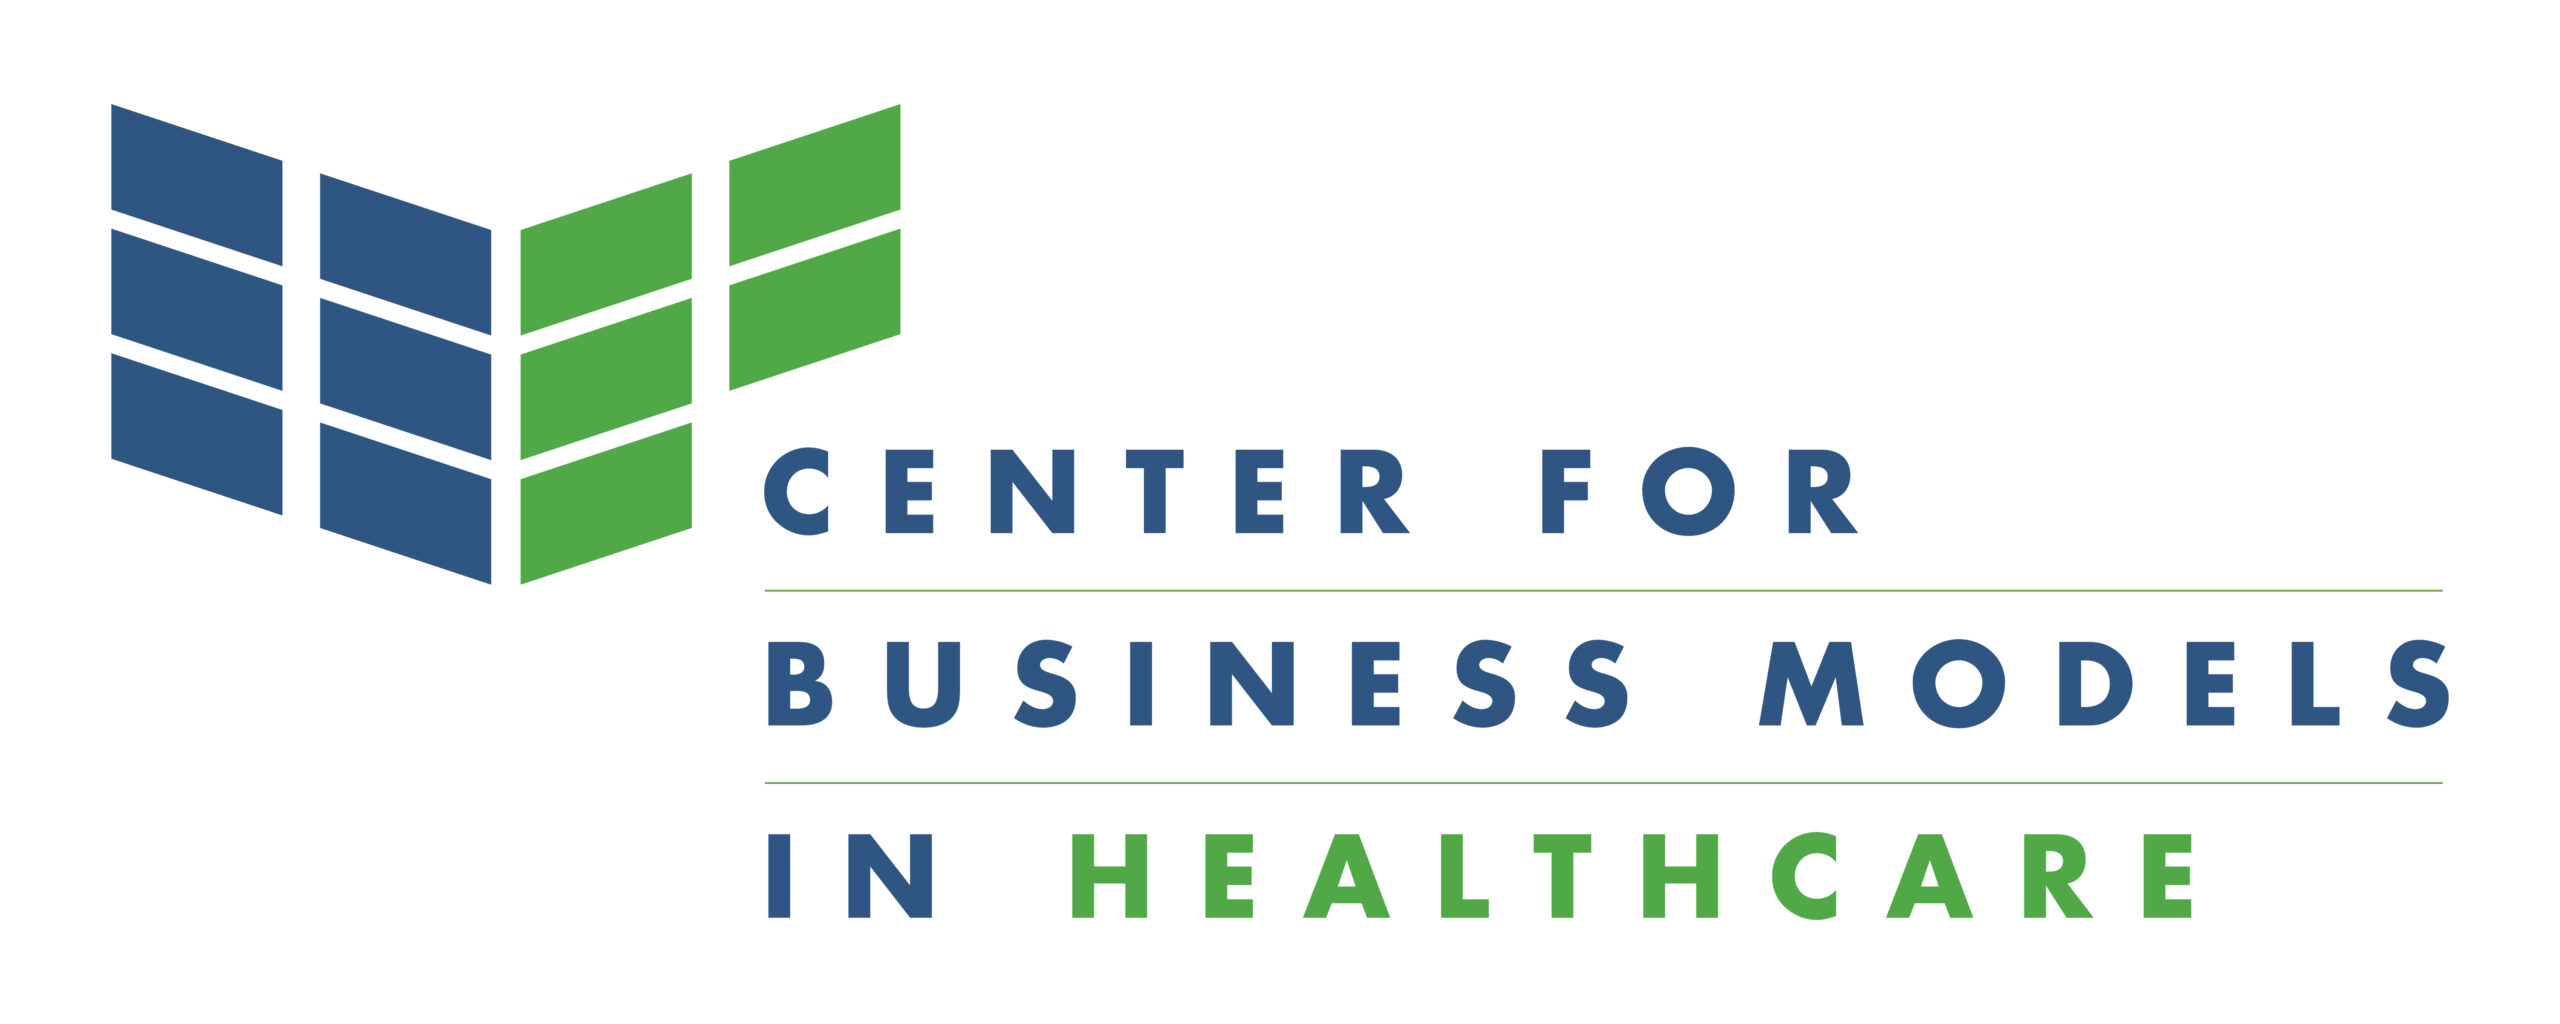 The Center for Business Models in Healthcare